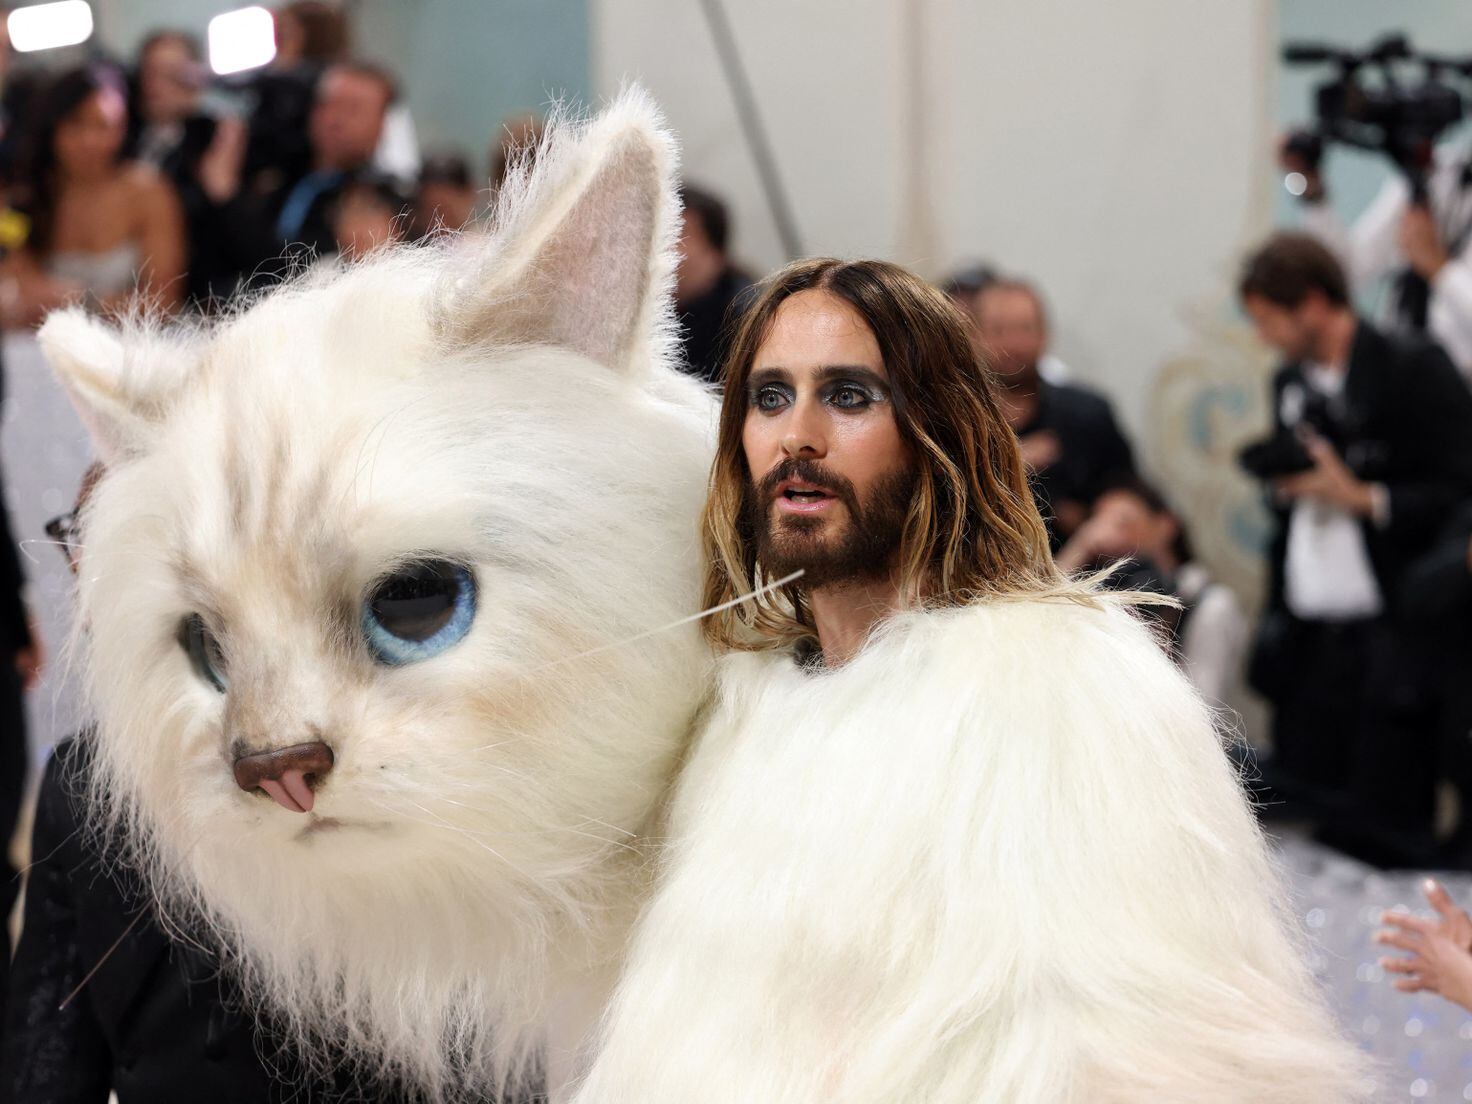 Jared Leto Dressed Up as Karl Lagerfeld's Cat Choupette at the 2023 Met Gala